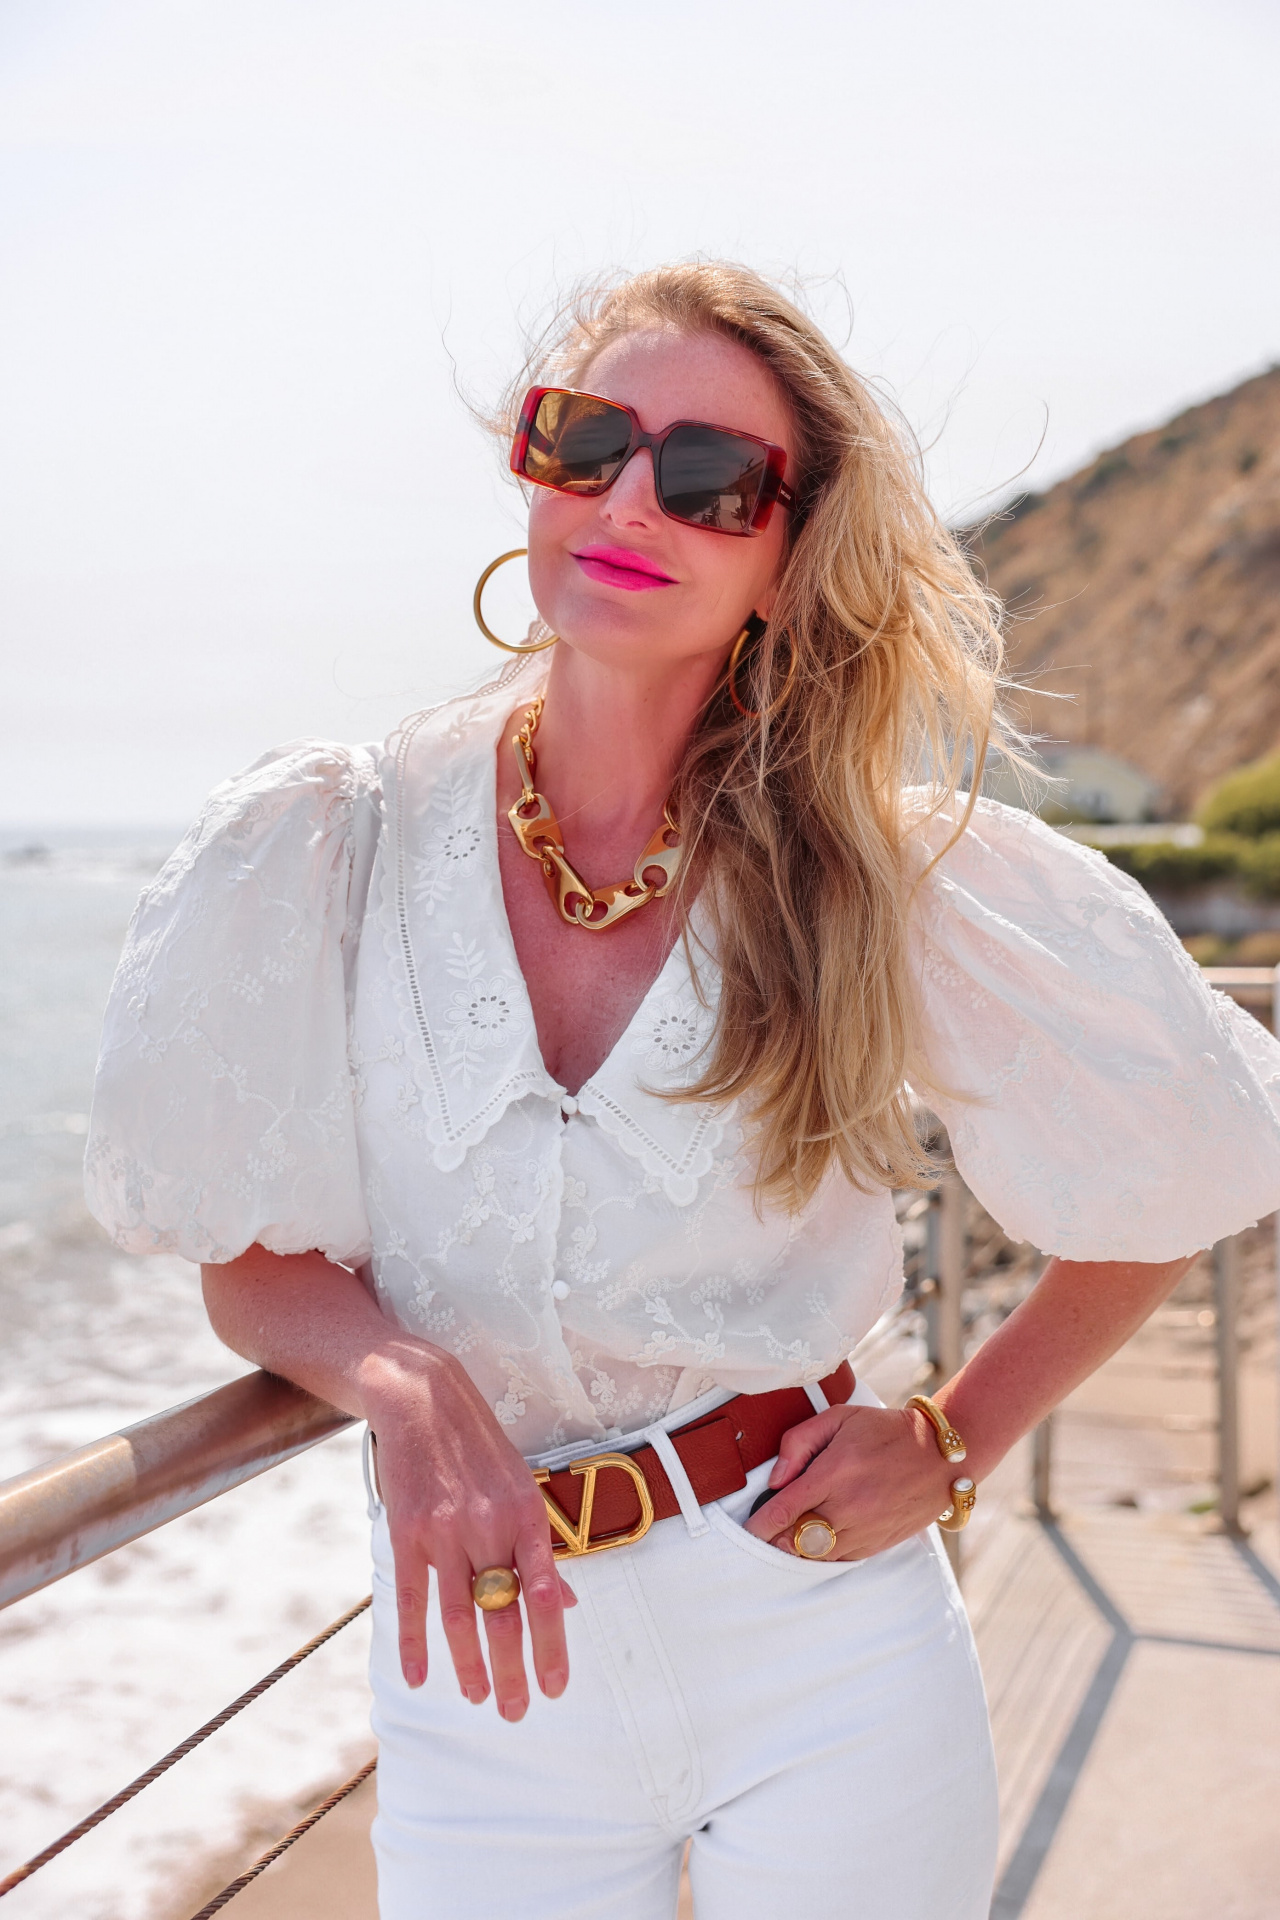 summer mom style, best summer mom outfits, summer mom outfits 2022, casual mom outfits summer, stylish mom outfits 2022, fashion for moms in their 30s, fashion for moms in their 40s, cute mom outfits, casual mom outfits, erin busbee, busbee style, fashion over 40, malibu, california, white maje blouse, white mother hustler jeans, see by chloe platform heels, saint laurent square sunglasses, paco rabbane chunky gold necklace, dean davidson hoops, white tops for summer, best white top, best white tops for summer, statement tops, white statement tops